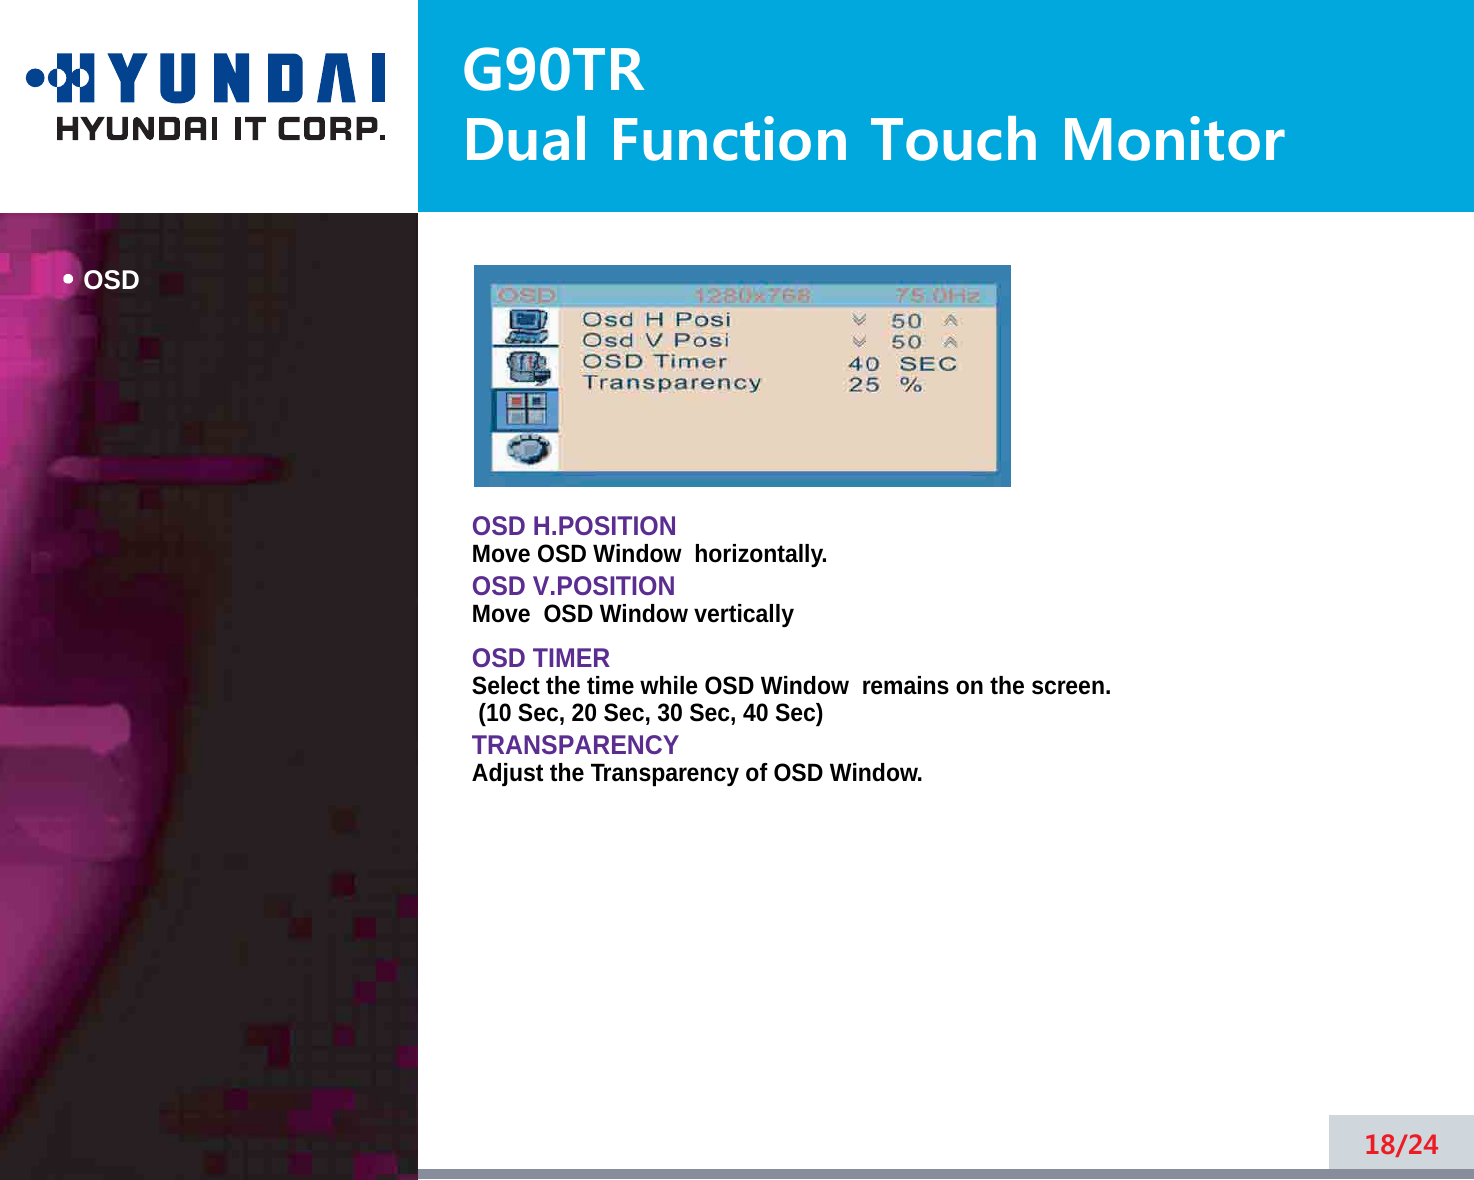 G90TRDual Function Touch MonitorOSD18/24OSD H.POSITIONMove OSD Window  horizontally.OSD V.POSITIONMove  OSD Window verticallyOSD TIMERSelect the time while OSD Window  remains on the screen.(10 Sec, 20 Sec, 30 Sec, 40 Sec)TRANSPARENCYAdjust the Transparency of OSD Window.